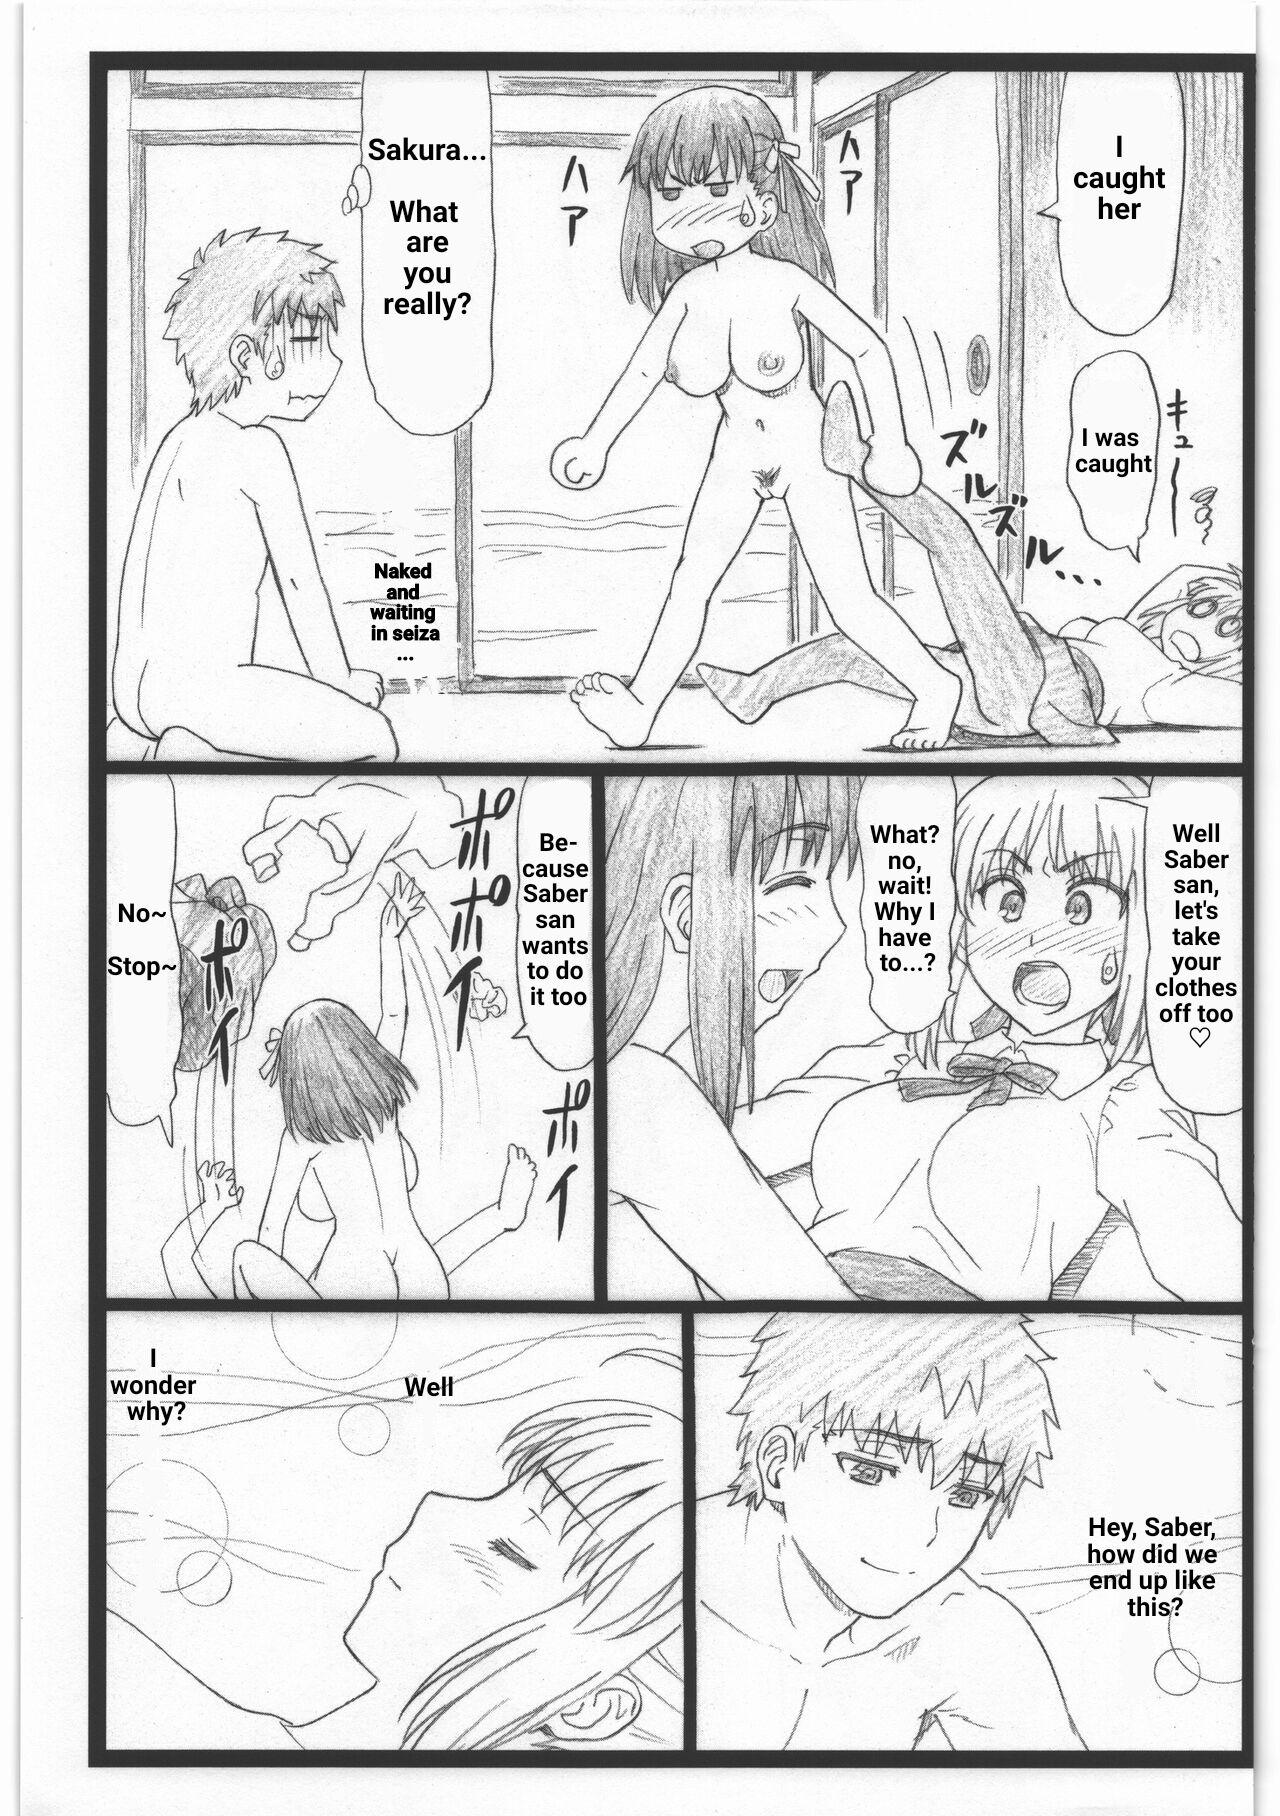 Holes C88 Omakebon - Fate stay night Brazilian - Page 5